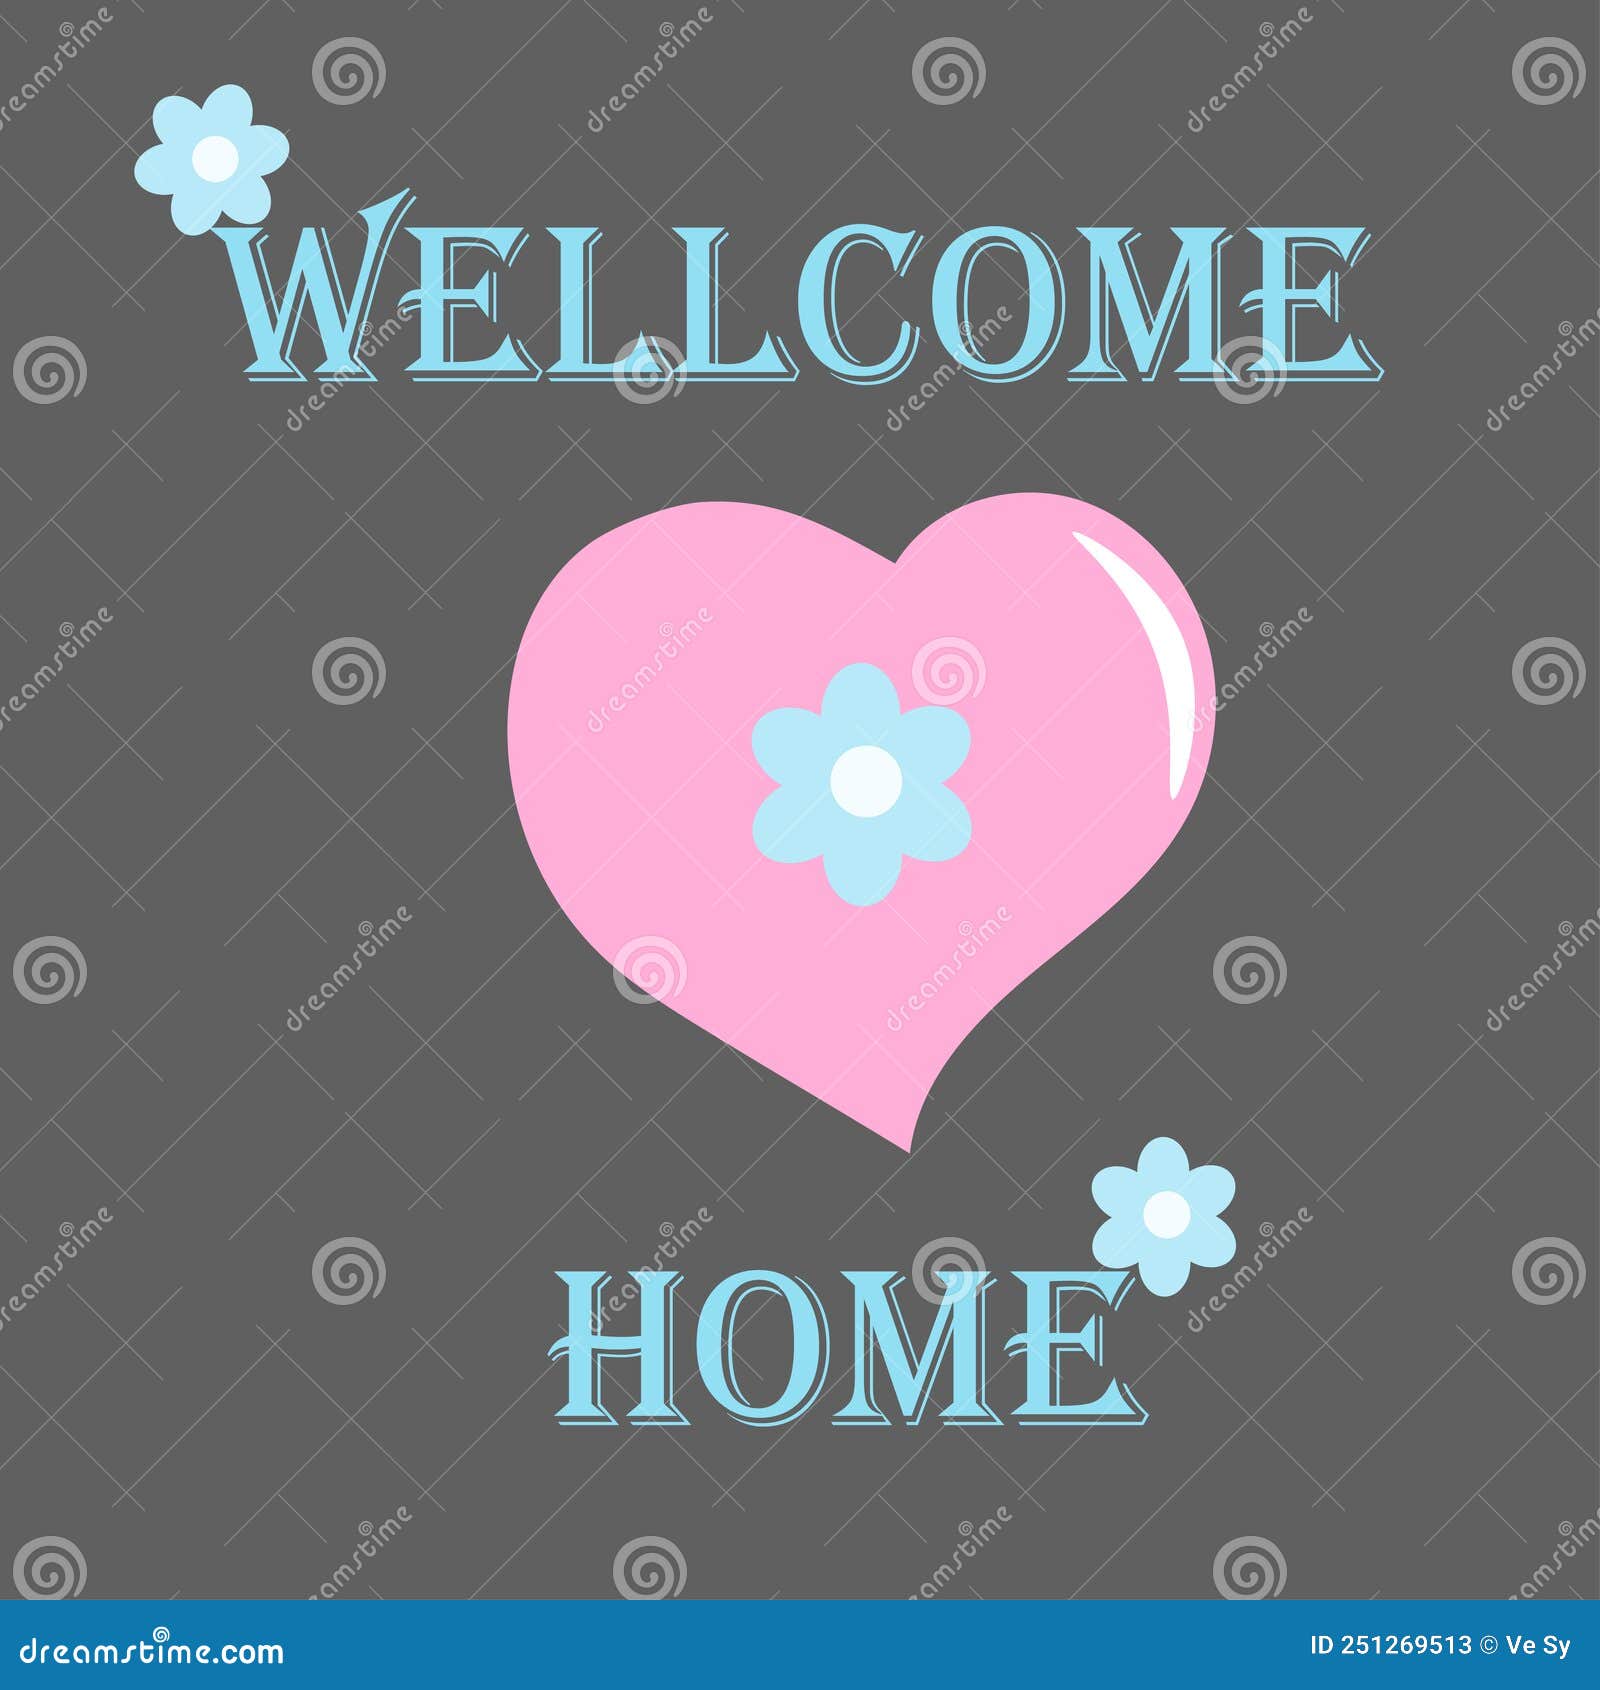 print wellcome home poster with pink heart and flowers